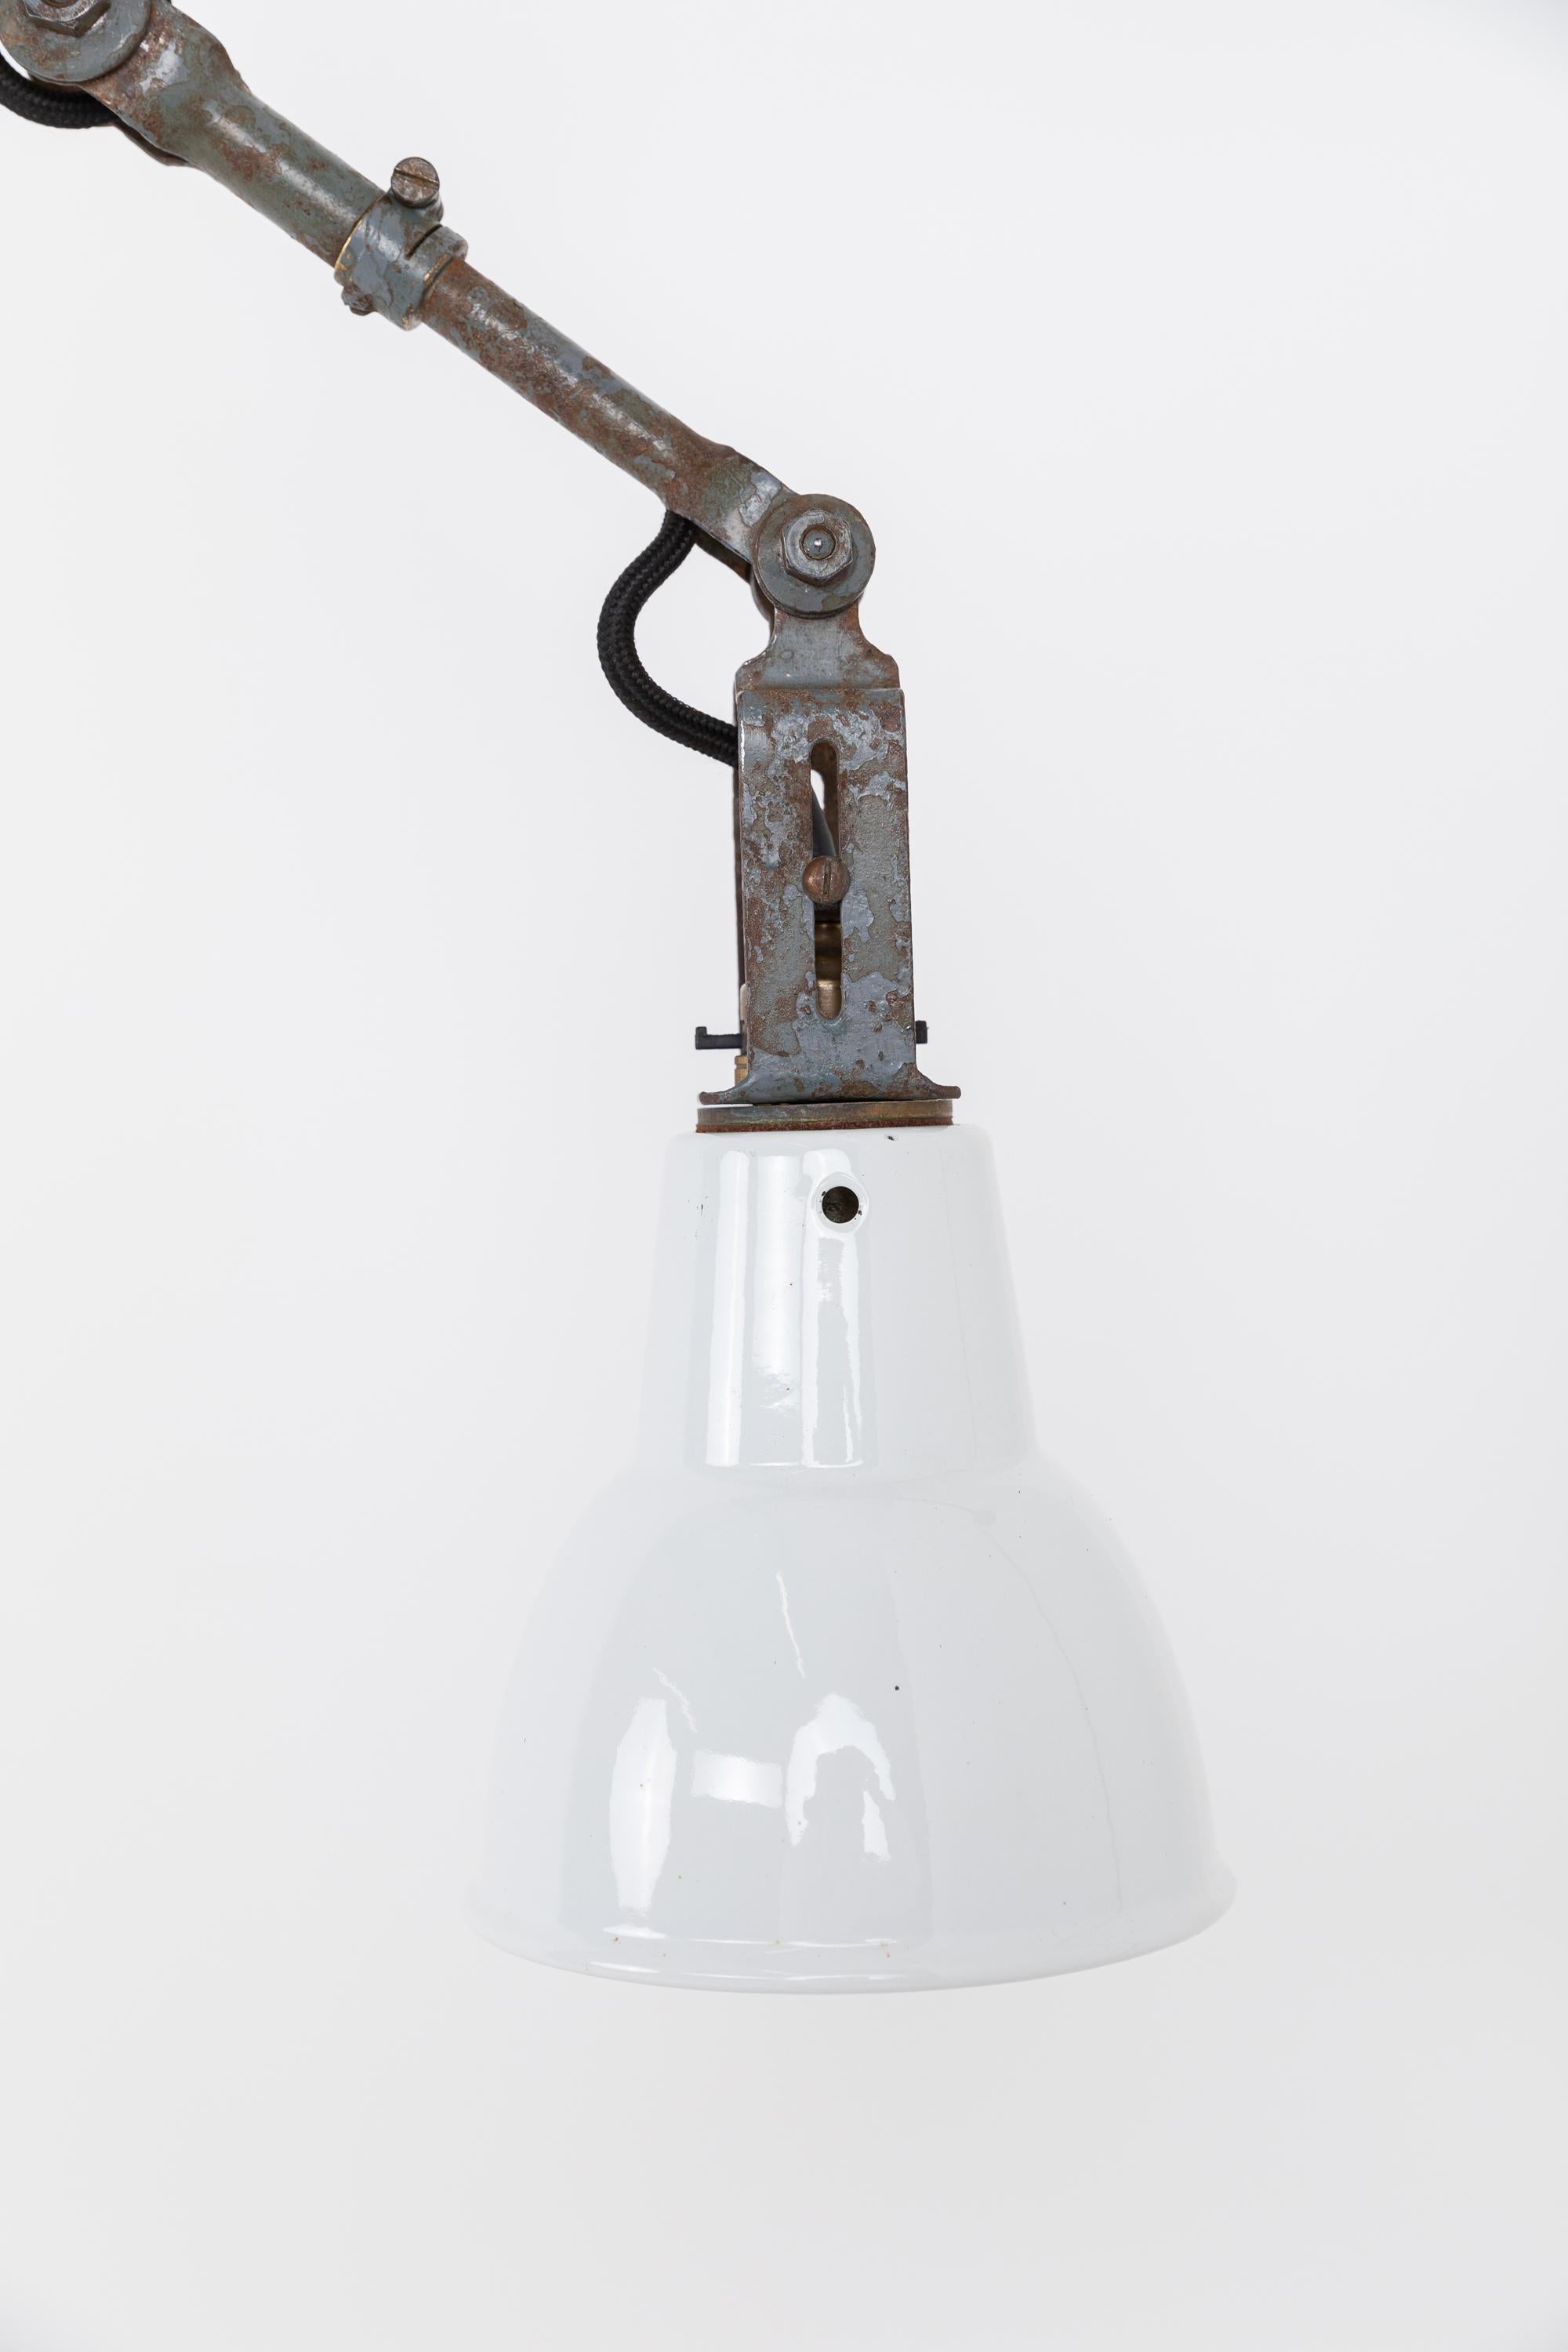 A beautiful example of factory machinists lamp made in England by Dugdills. c.1930

In completely original condition with factory applied paint with nice overall industrial patina. Fully articulating and very versatile - it could be desk, wall or